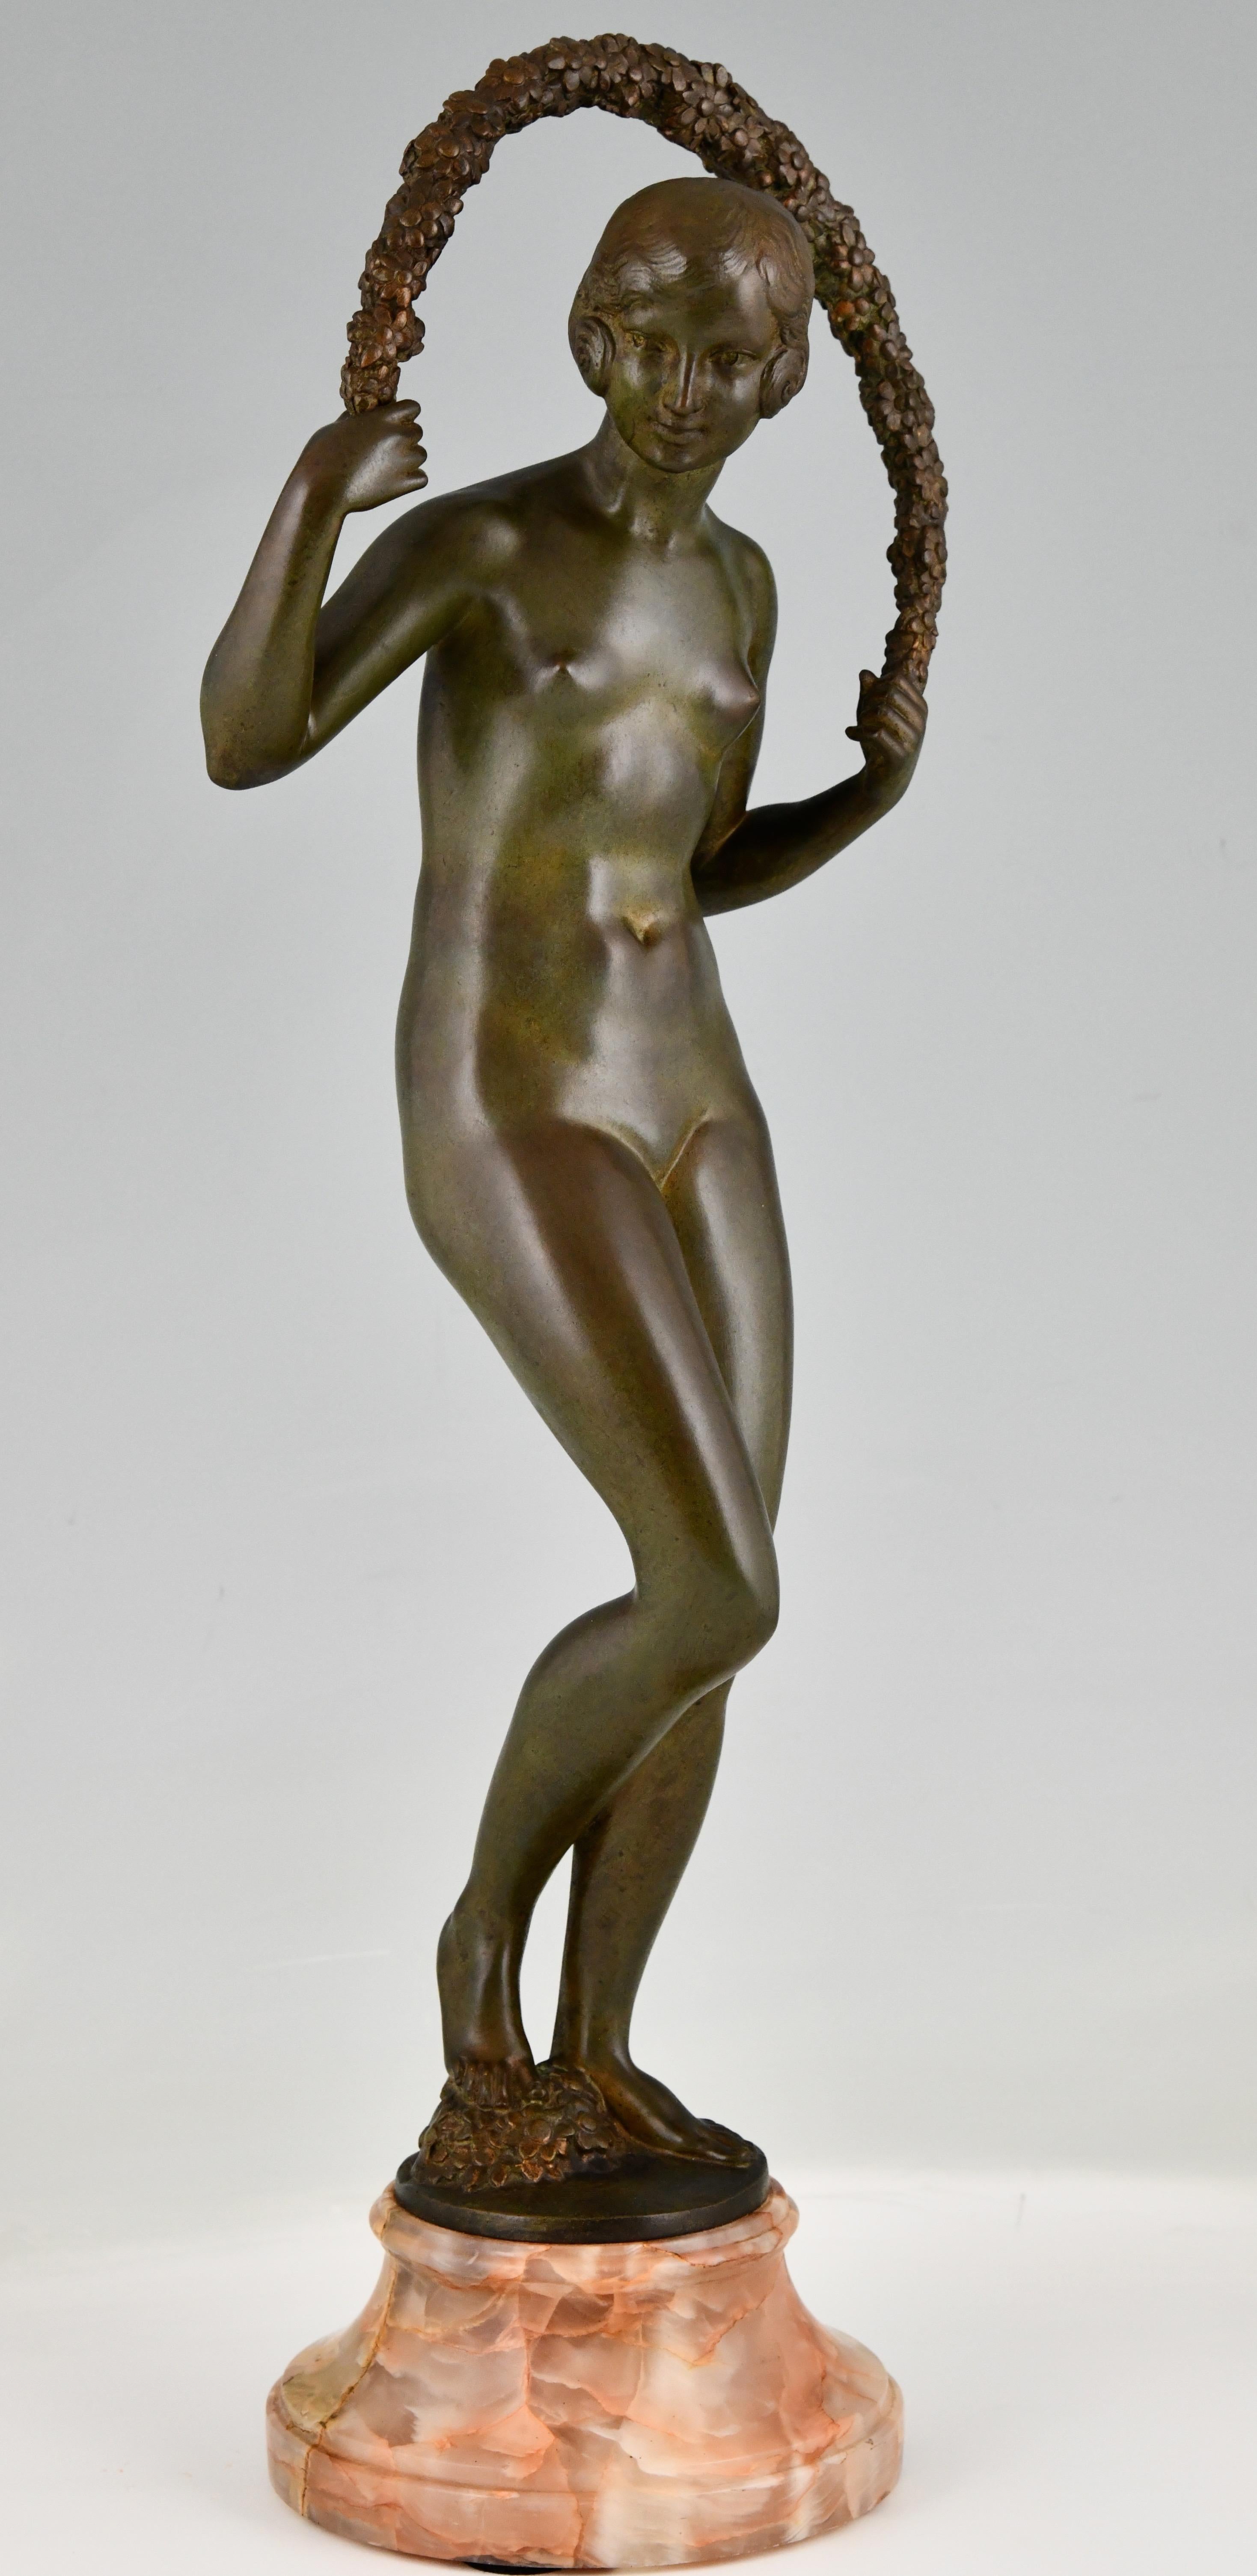 French Art Deco Bronze Sculpture Nude with Garland by Joe Descomps Cormier 1925 For Sale